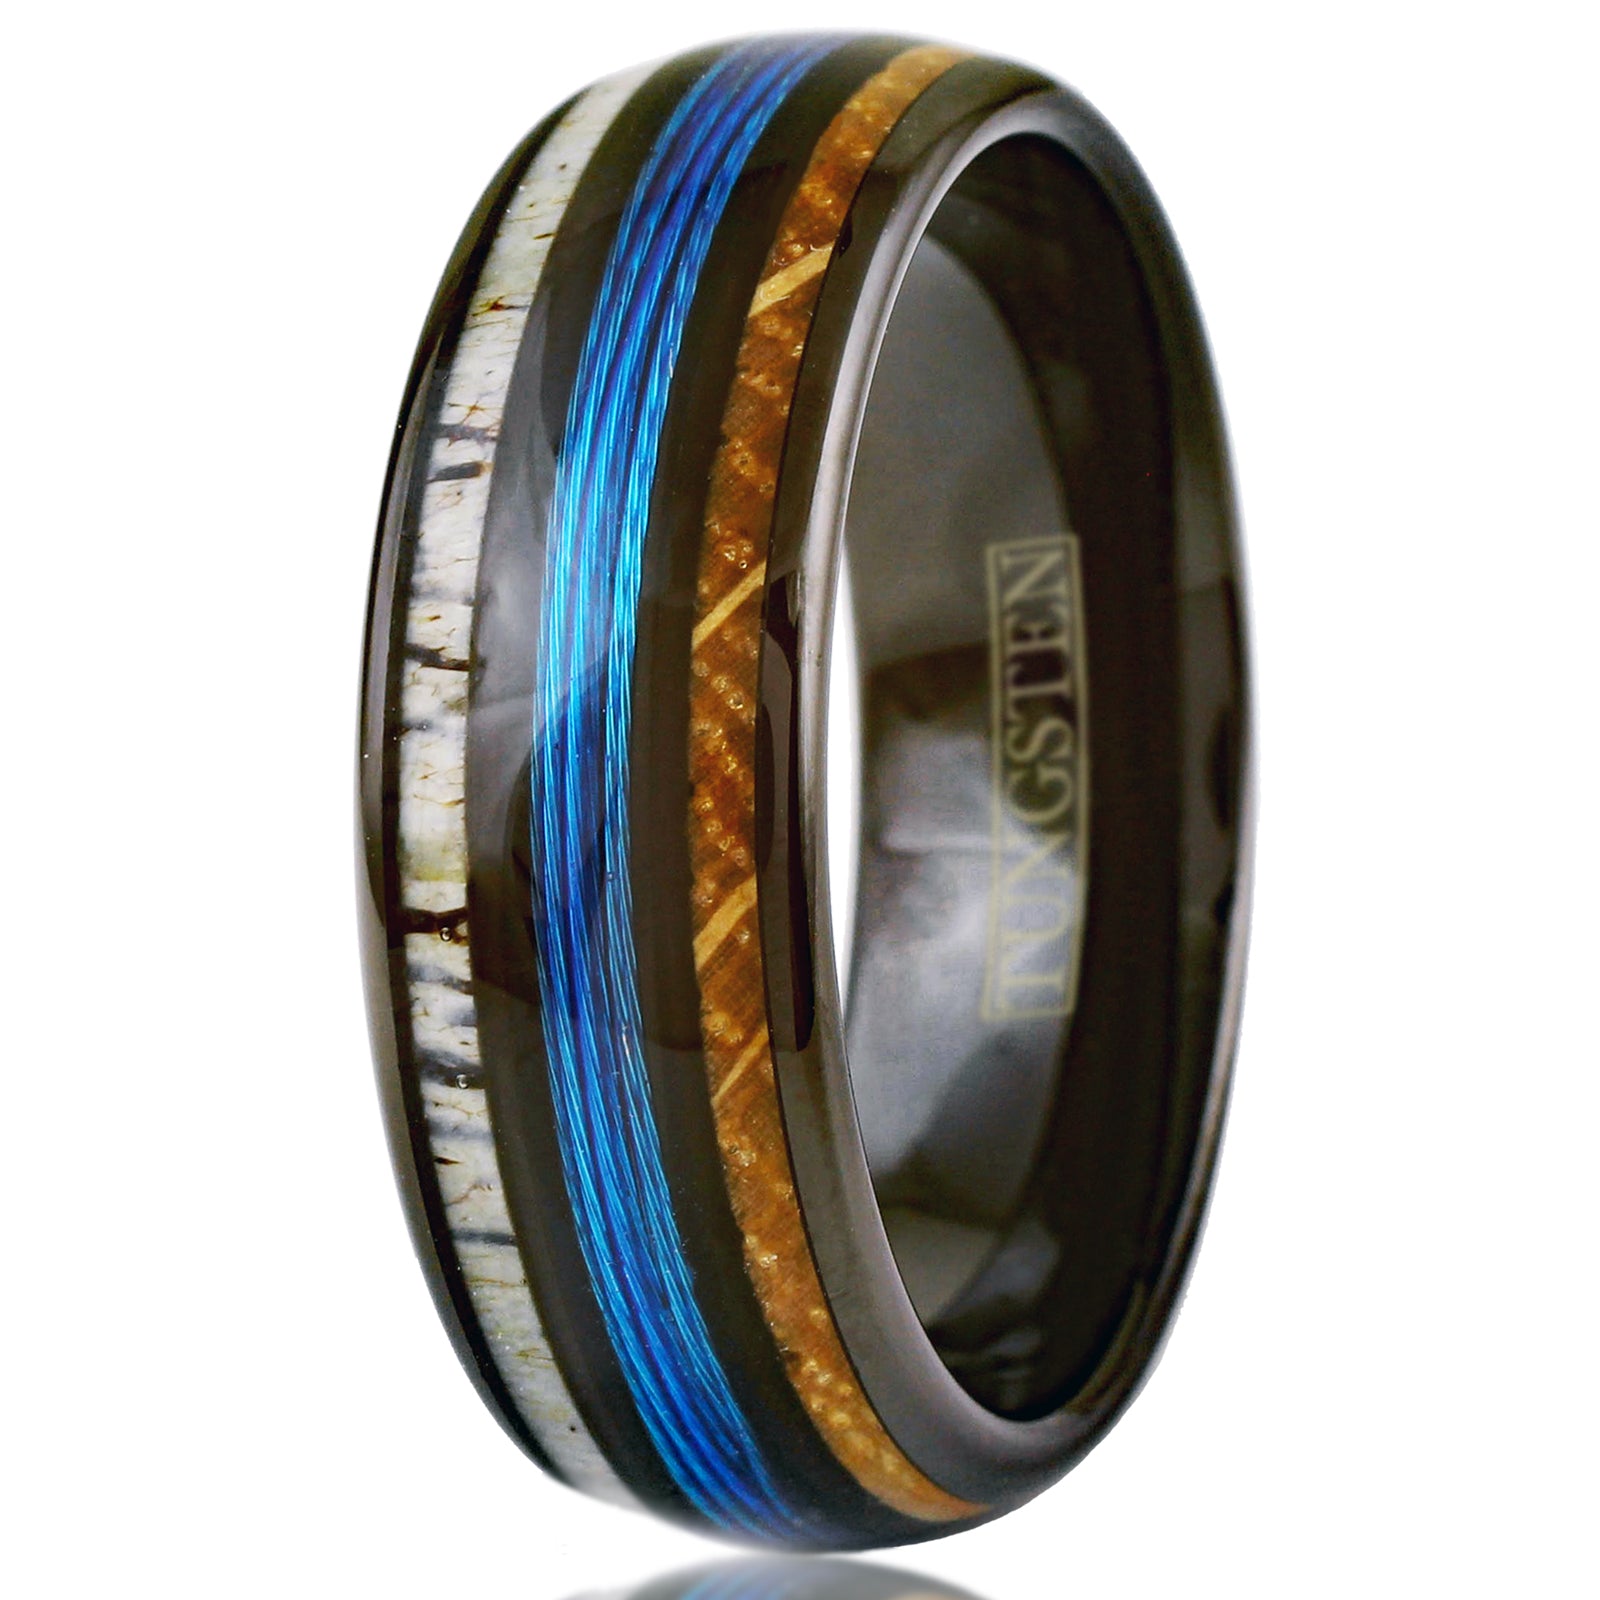 https://www.kingscrossjewelry.com/cdn/shop/files/black-tungsten-carbide-low-dome-band-ring-with-fishing-line-between-whiskey-oak-barrel-wood-and-deer-antler-inlays-discount-tungsten-rings-wedding-bands-a-white-photo.jpg?v=1697267877